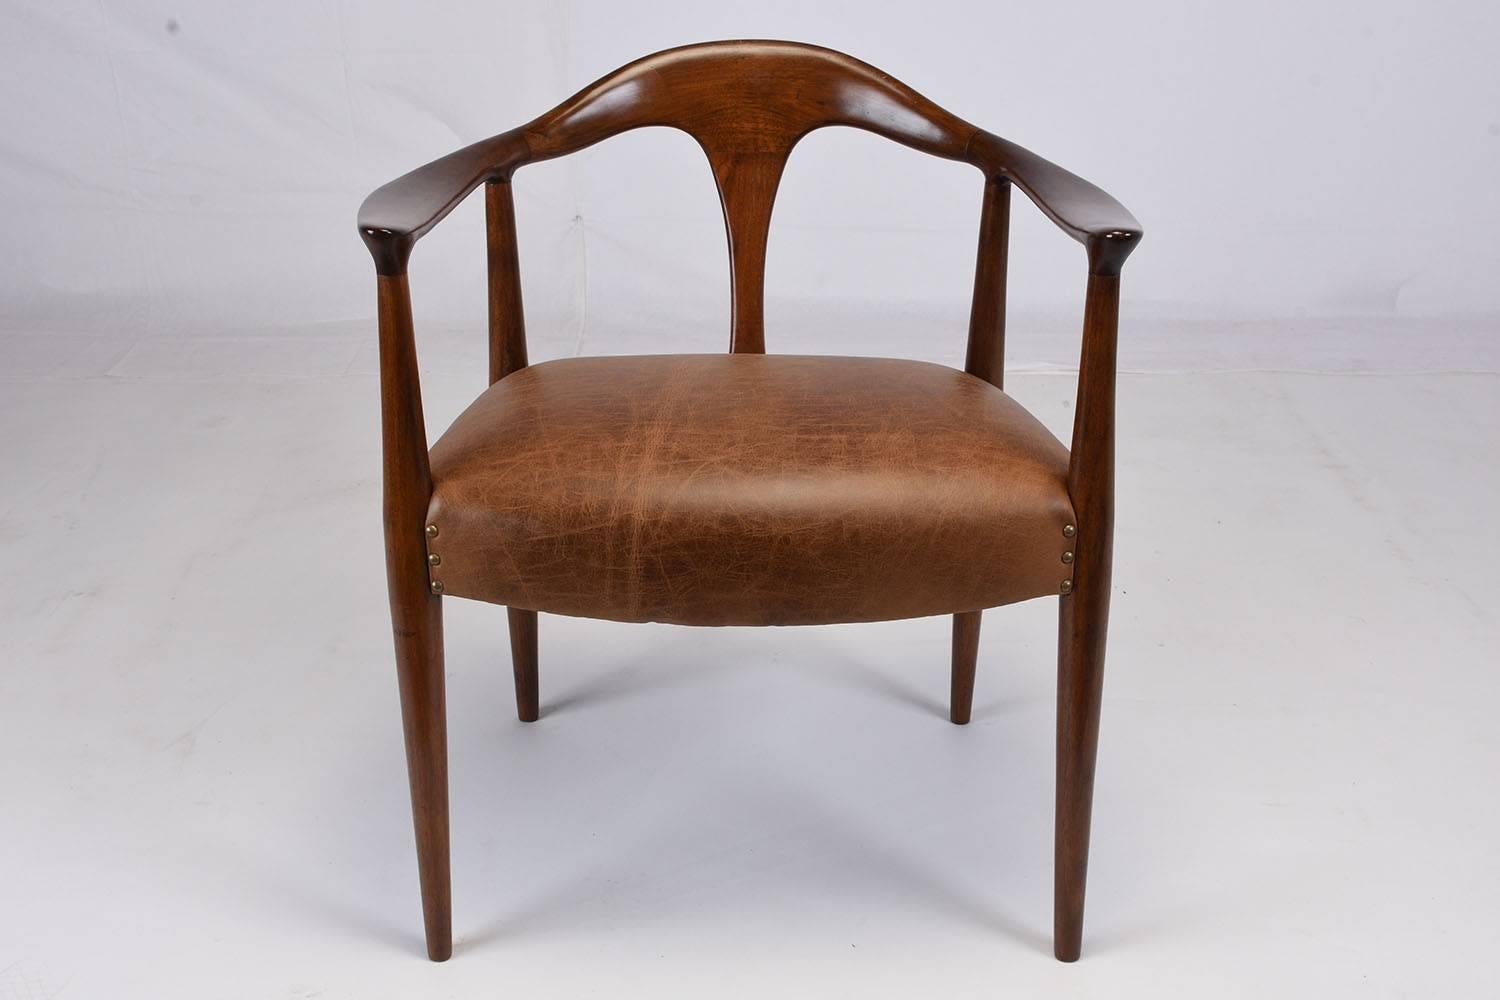 This 1960s Mid-Century Scandinavian armchair is made of teak wood that has been stained in a rich walnut color finish. The carved wood frame is shaped with a curved back and tapered legs. The comfortable seat has recently been professionally